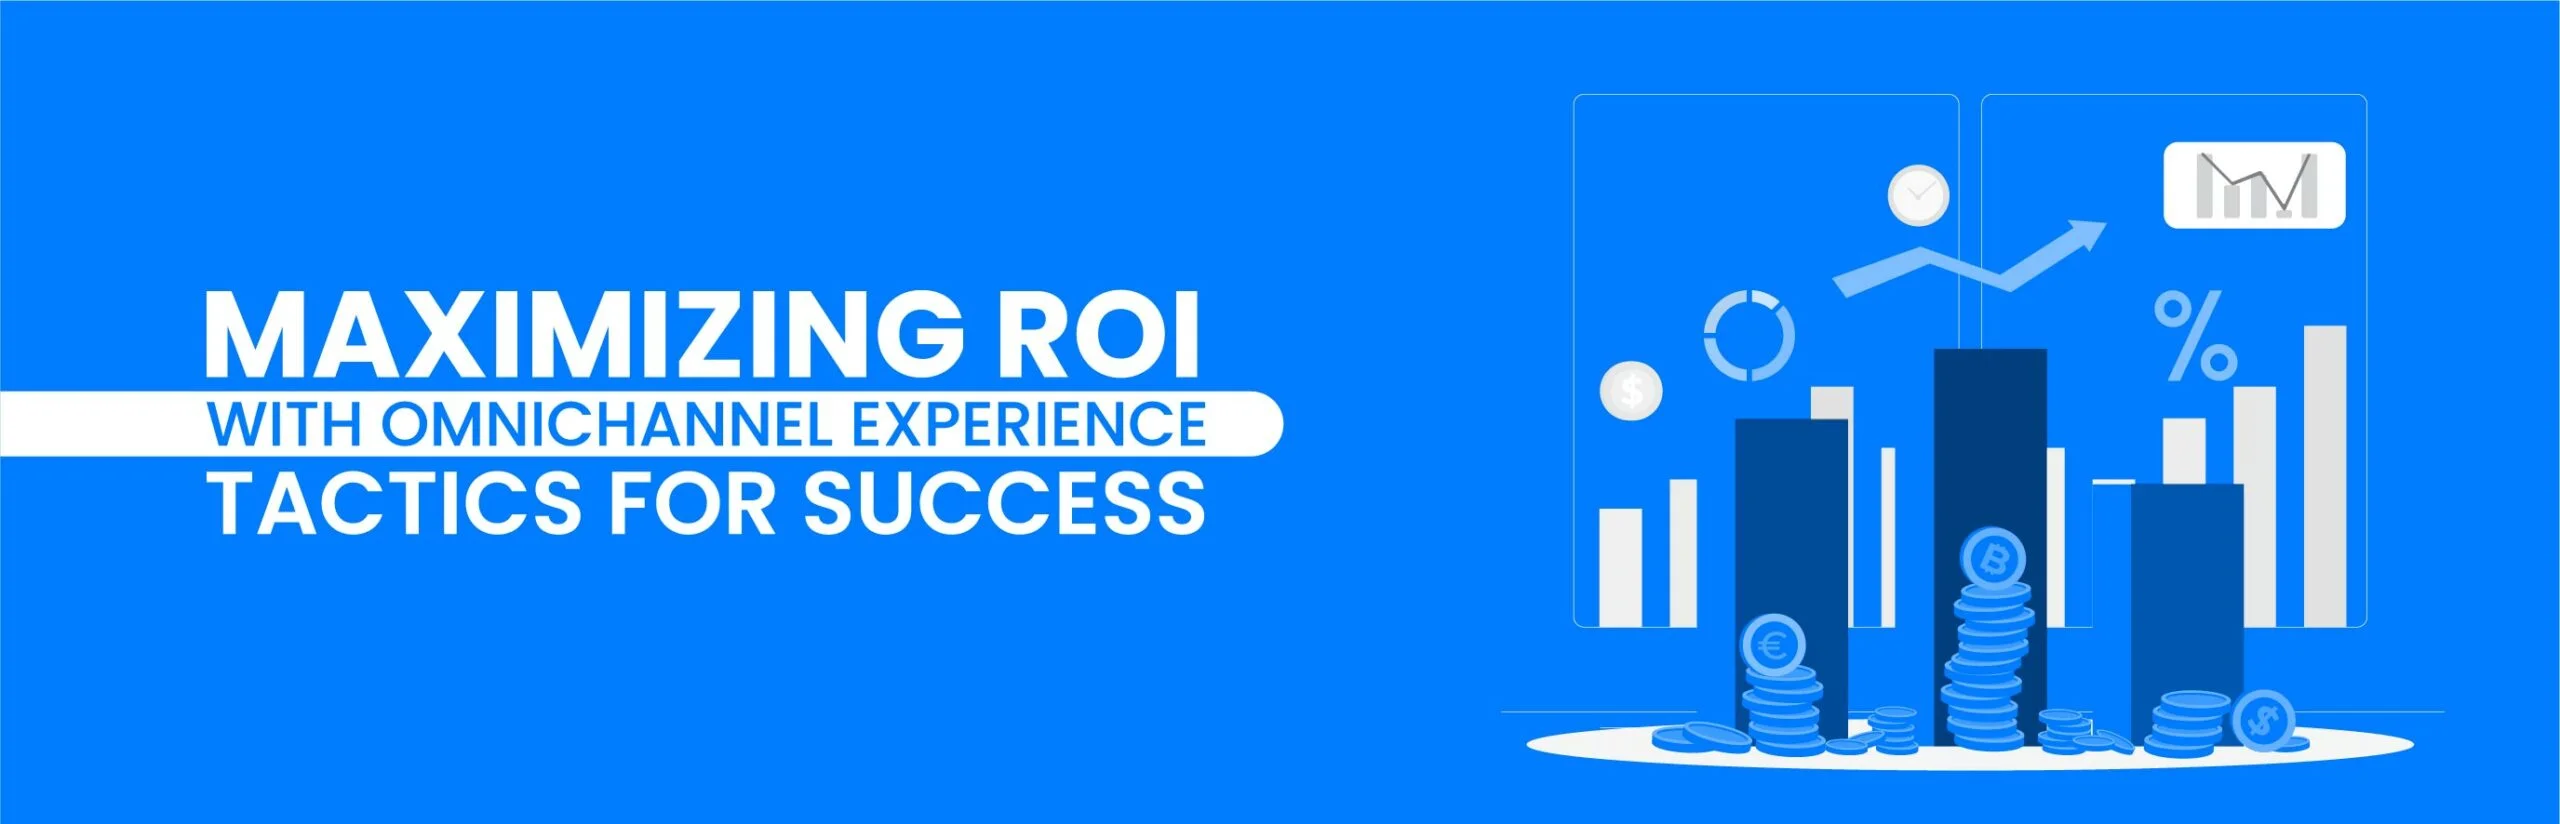 Maximizing ROI with Omnichannel Experience: Tactics for Success